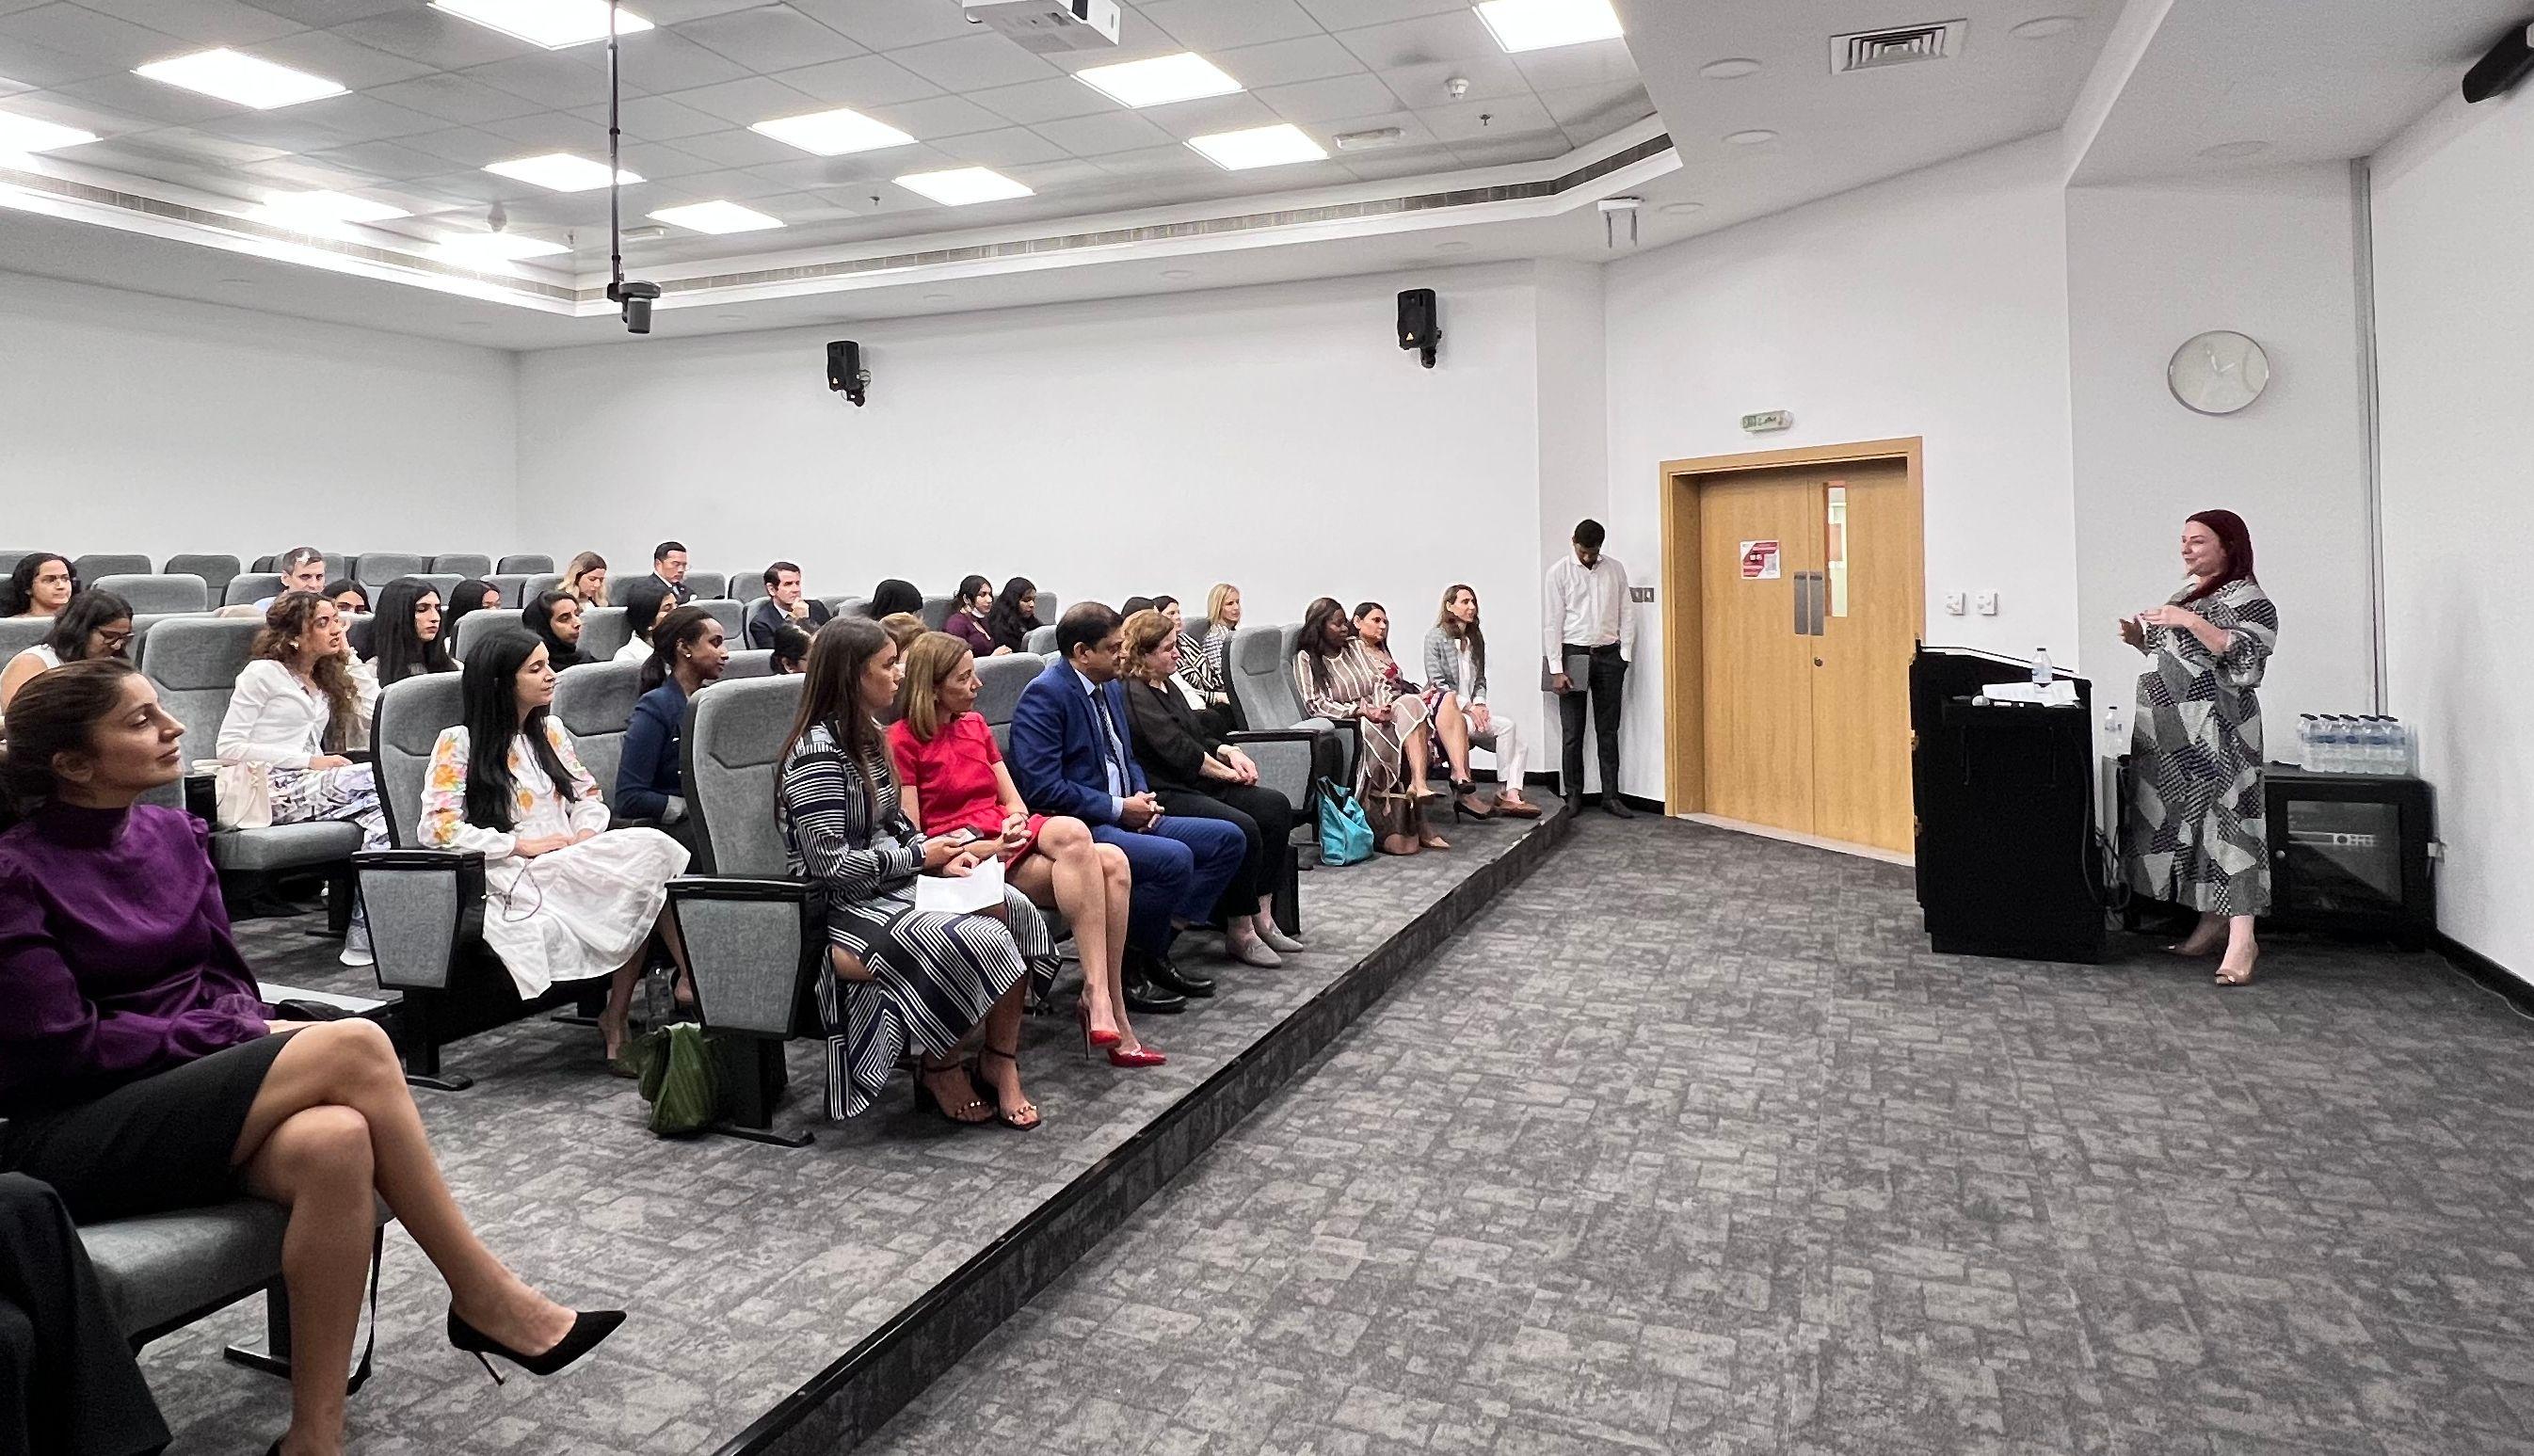 MDX Dubai launches JURIS Centre of Excellence for Legal Education and Training